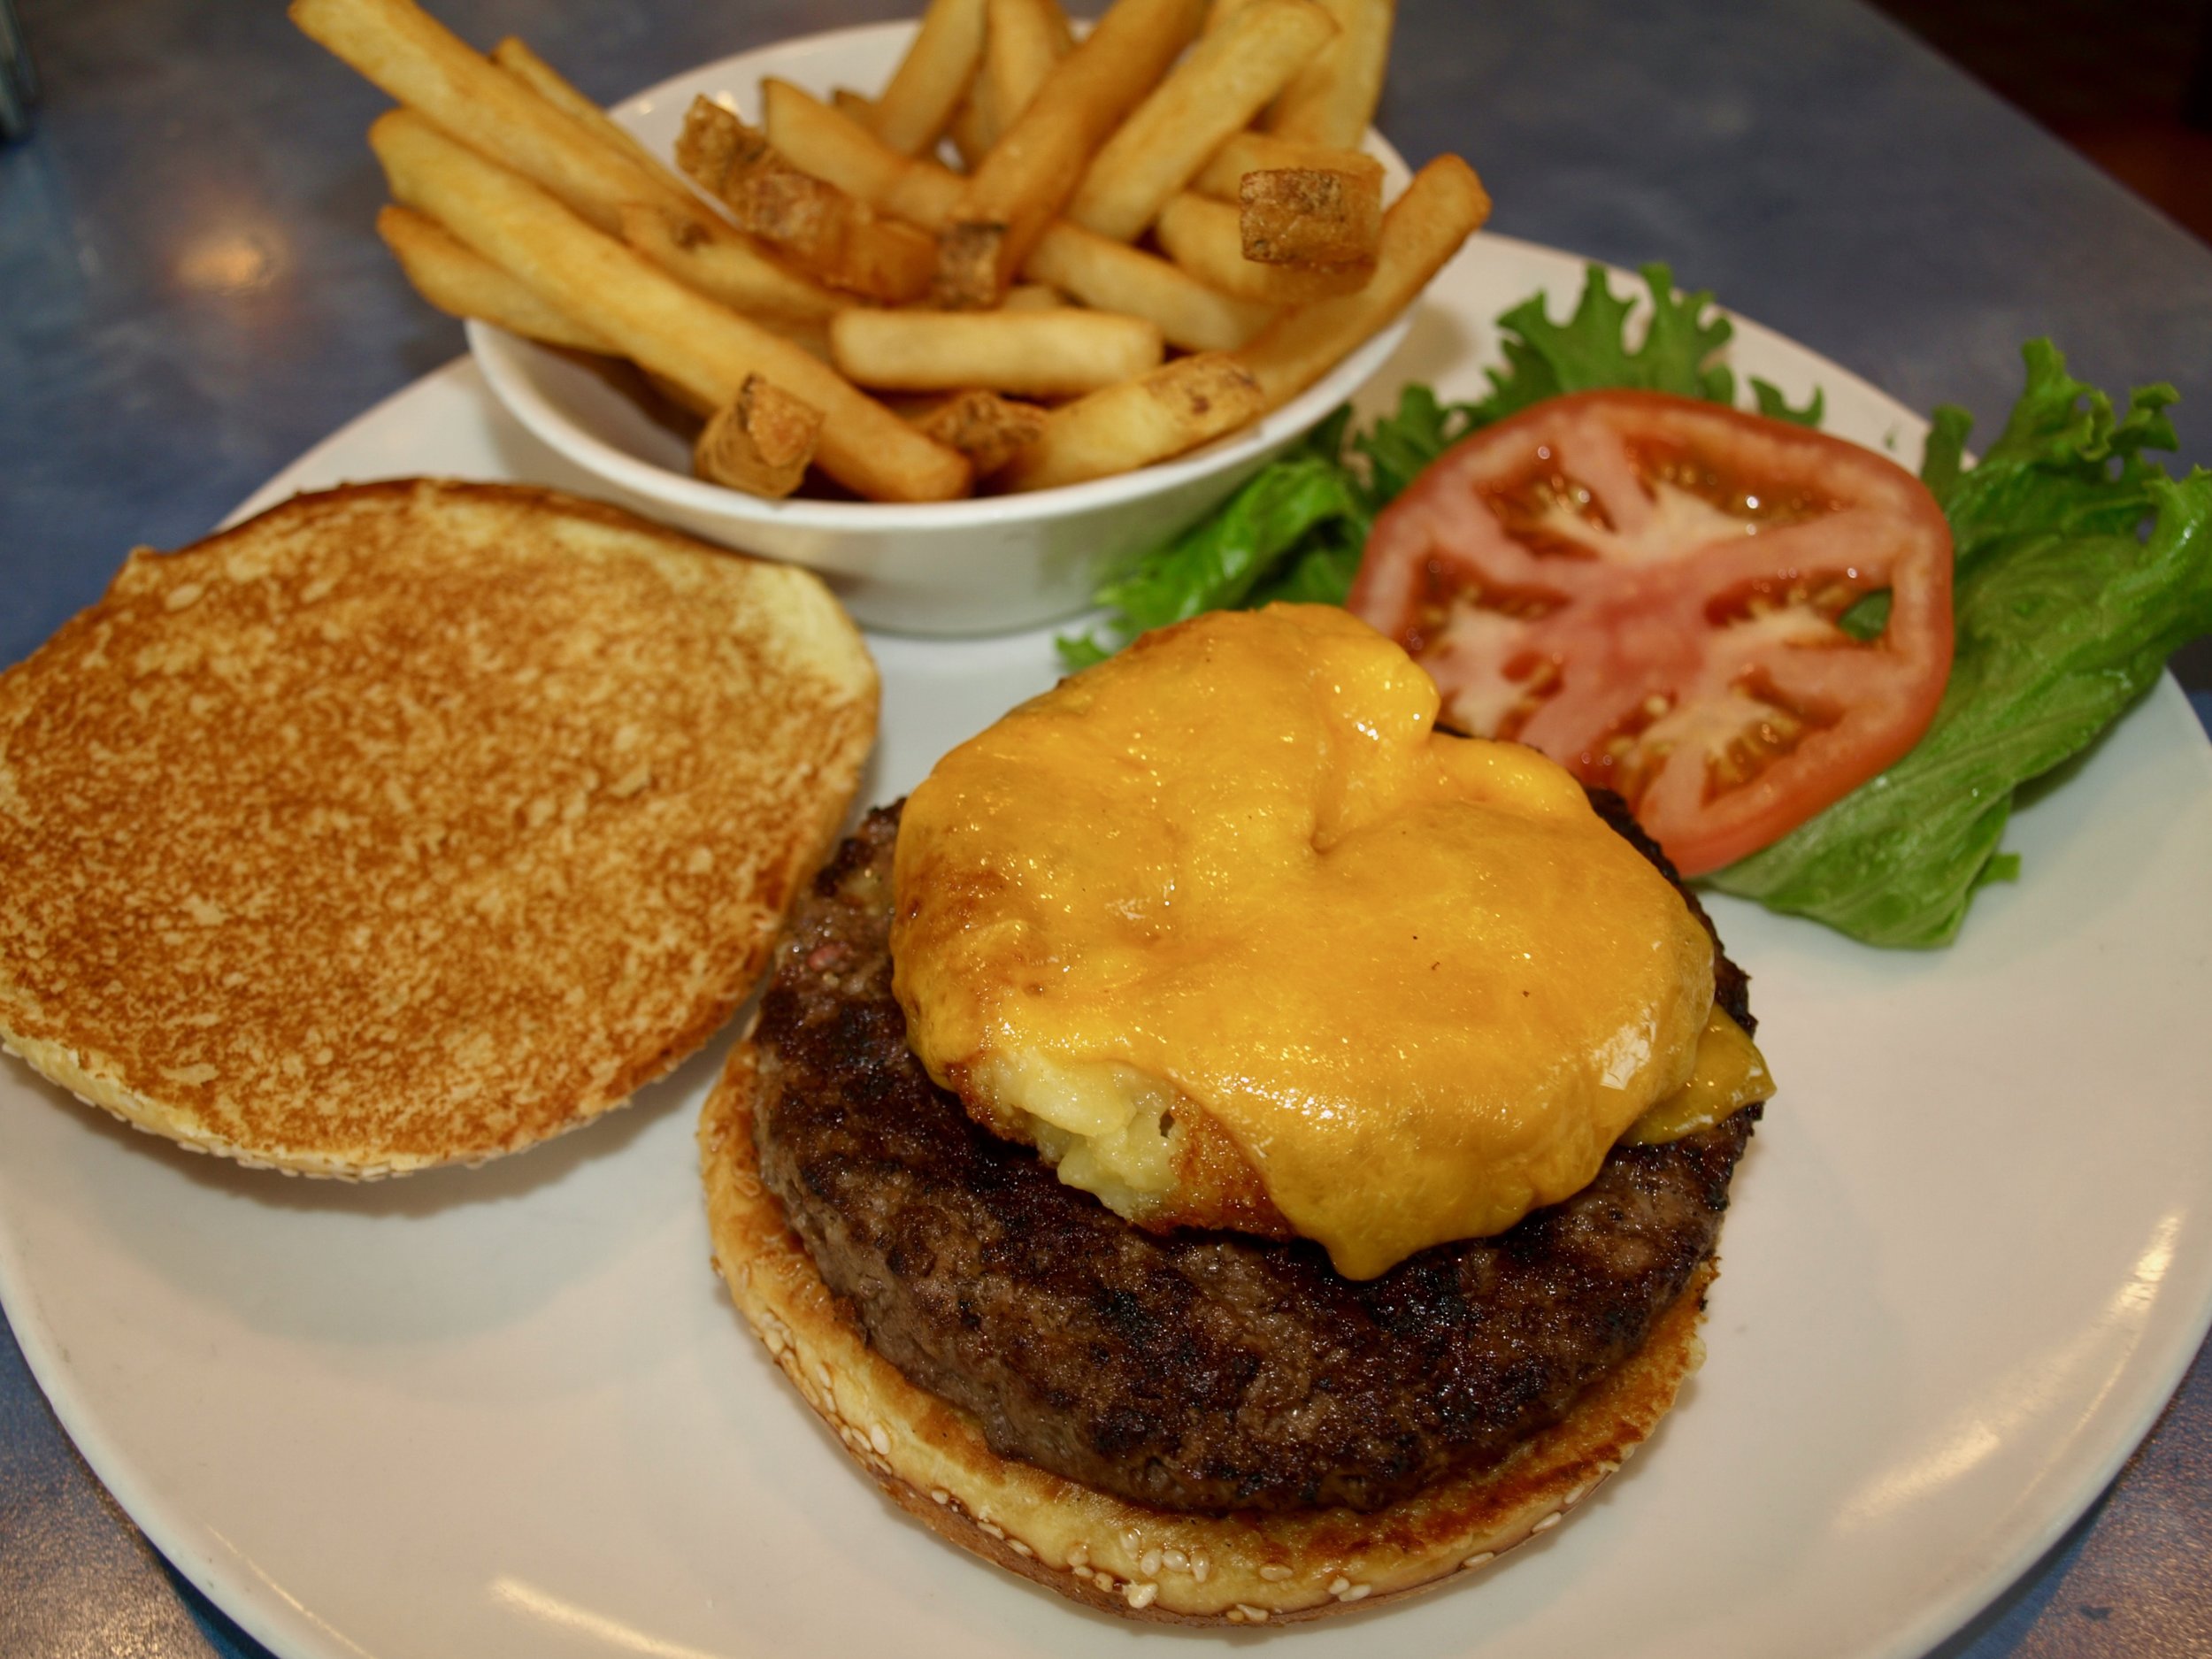  Mac and cheese cheddar cheeseburger starts with a fresh beef burger topped with fried mac and cheese bites, melted cheddar, lettuce and tomato.  Long Islander News photos/Sophia Ricco  